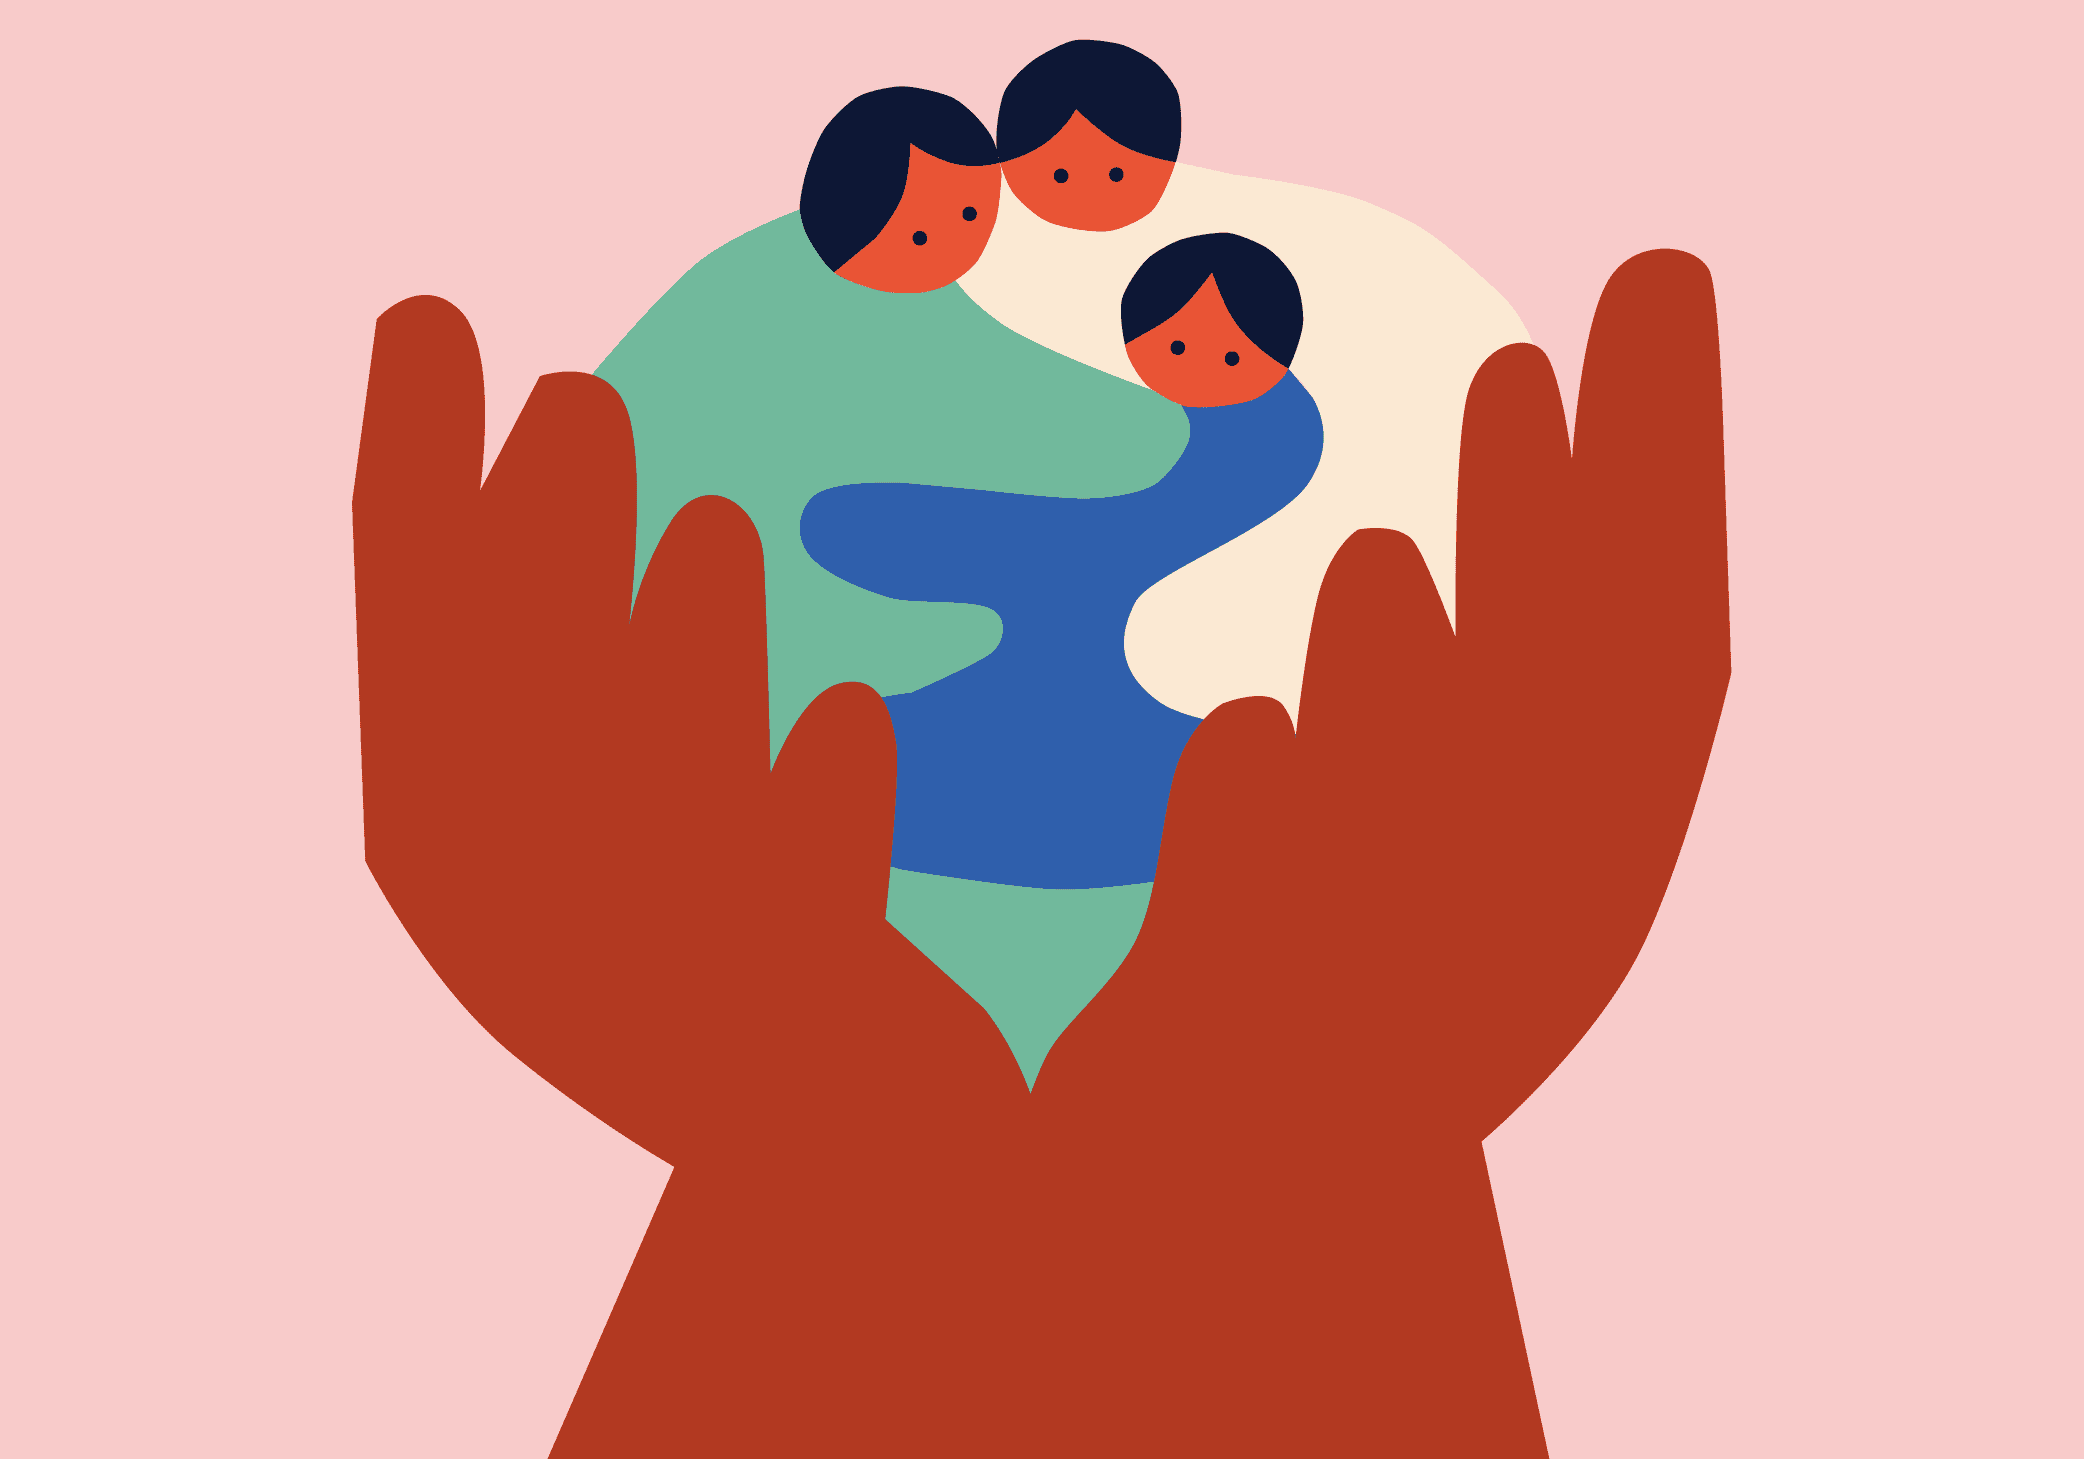 An illustration where a family consisting of two adults and one child hug each other inside of a large pair of hands that holds them all.